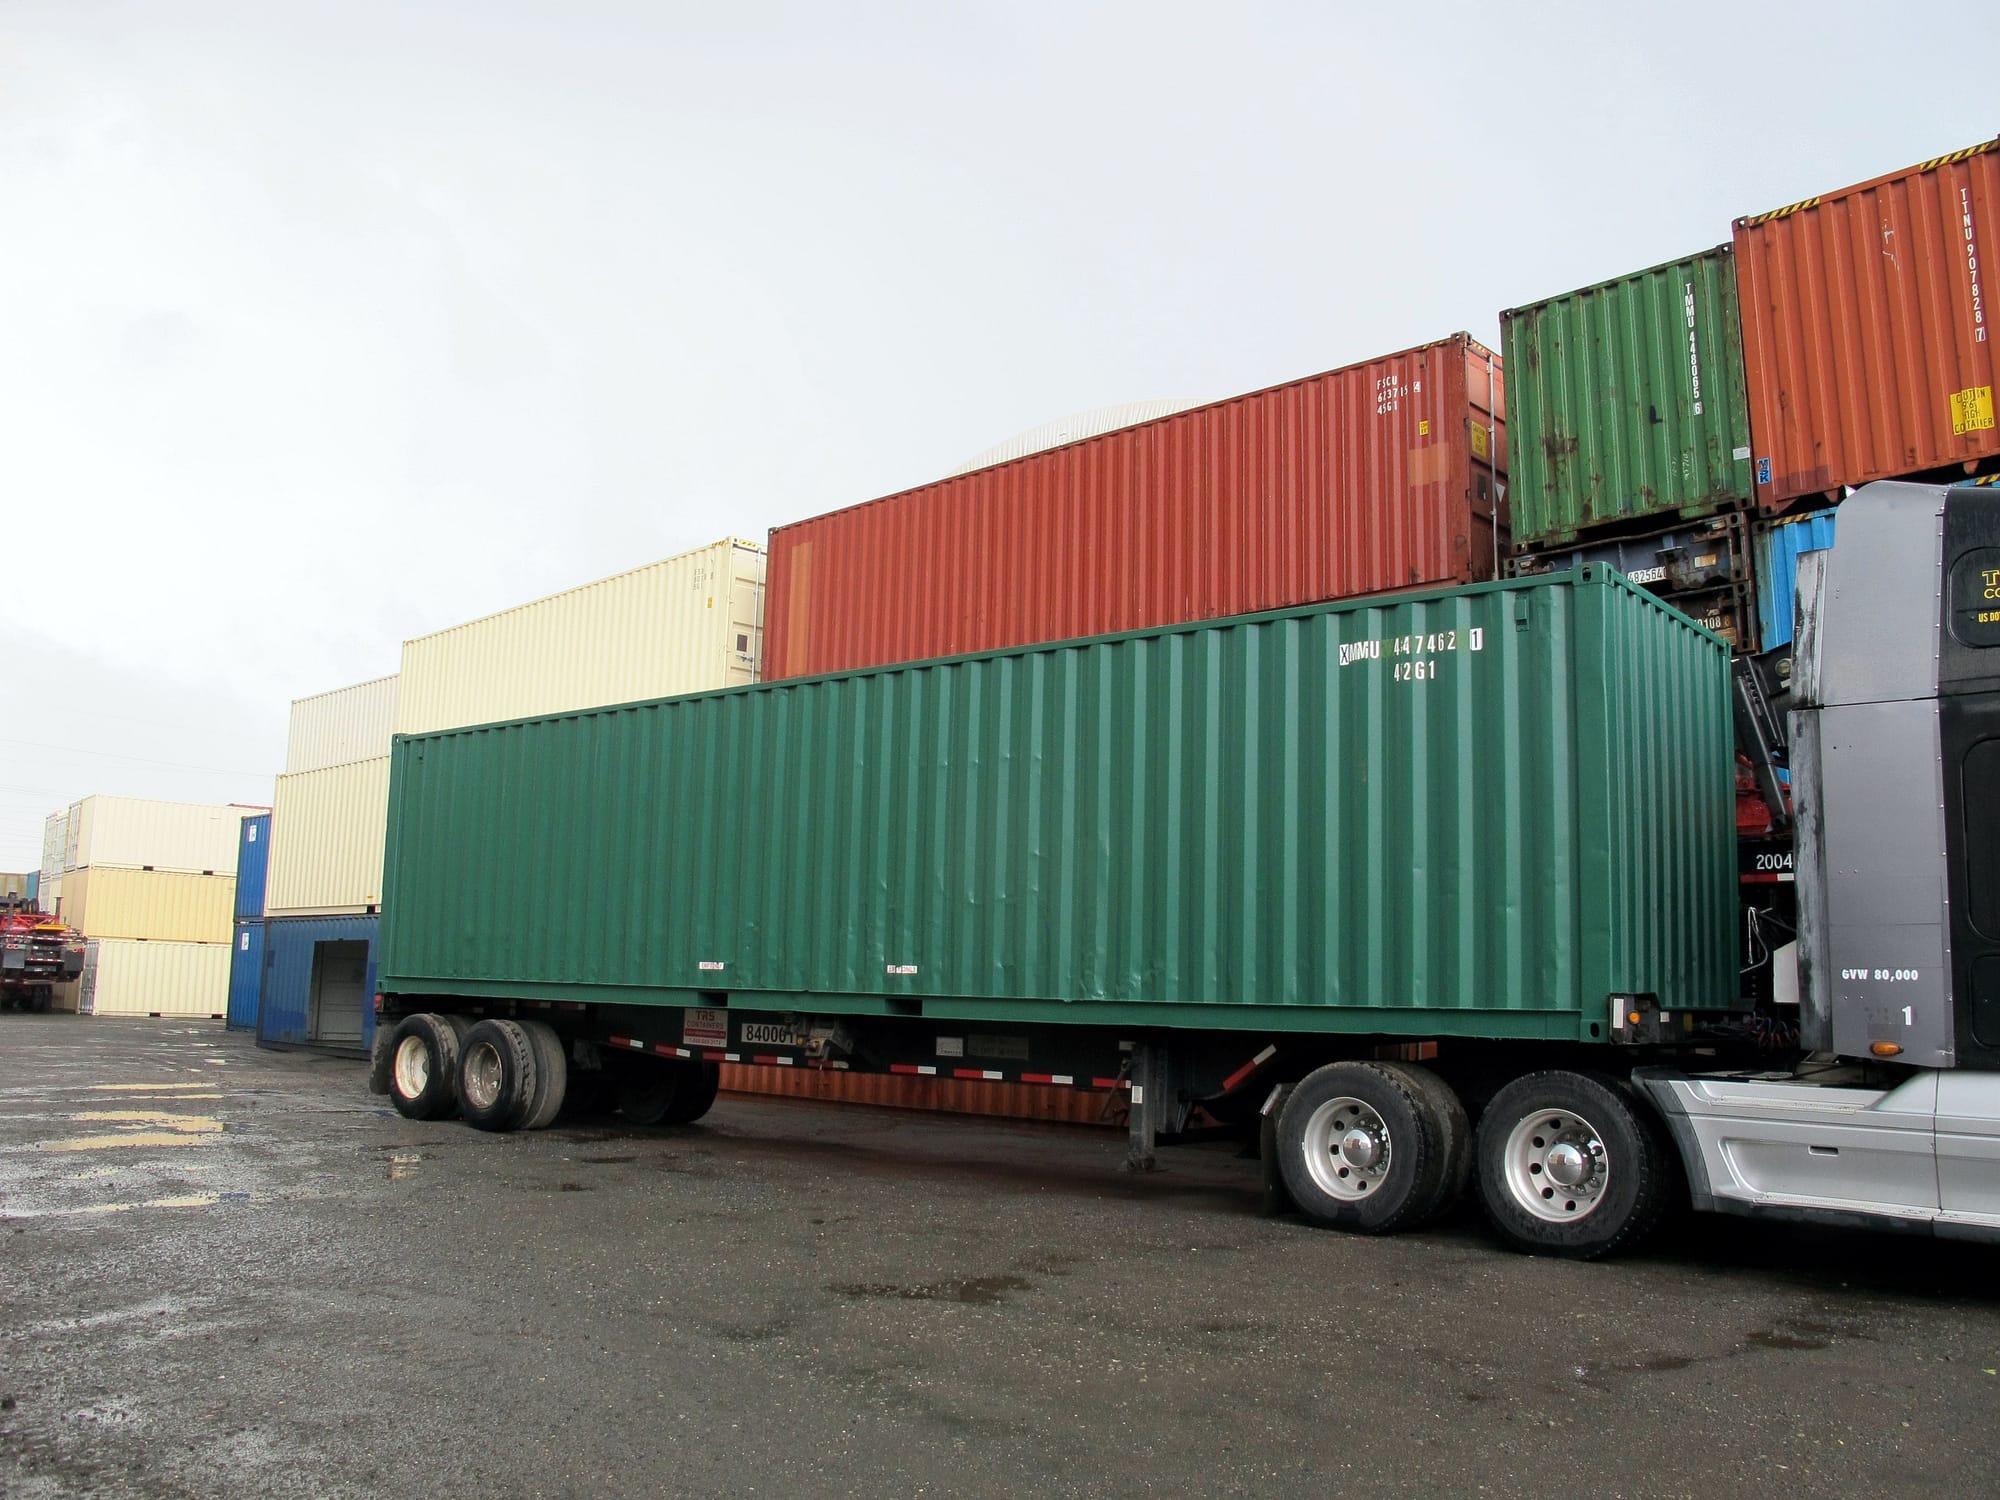 TRS Containers chassis fleet in FHWA condition are used to tranport empty or loaded containers